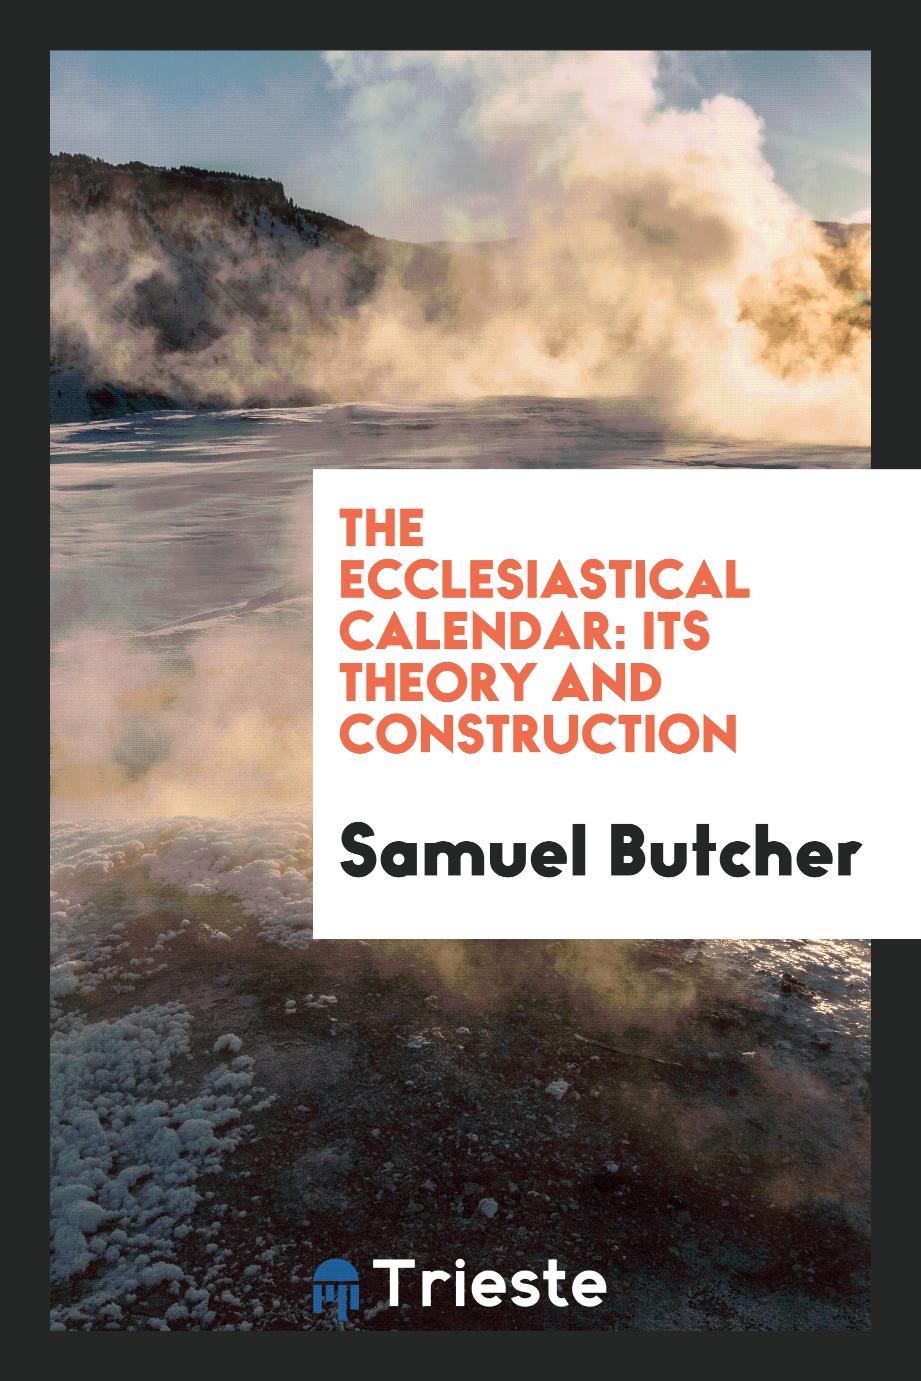 Samuel Butcher - The Ecclesiastical Calendar: Its Theory and Construction